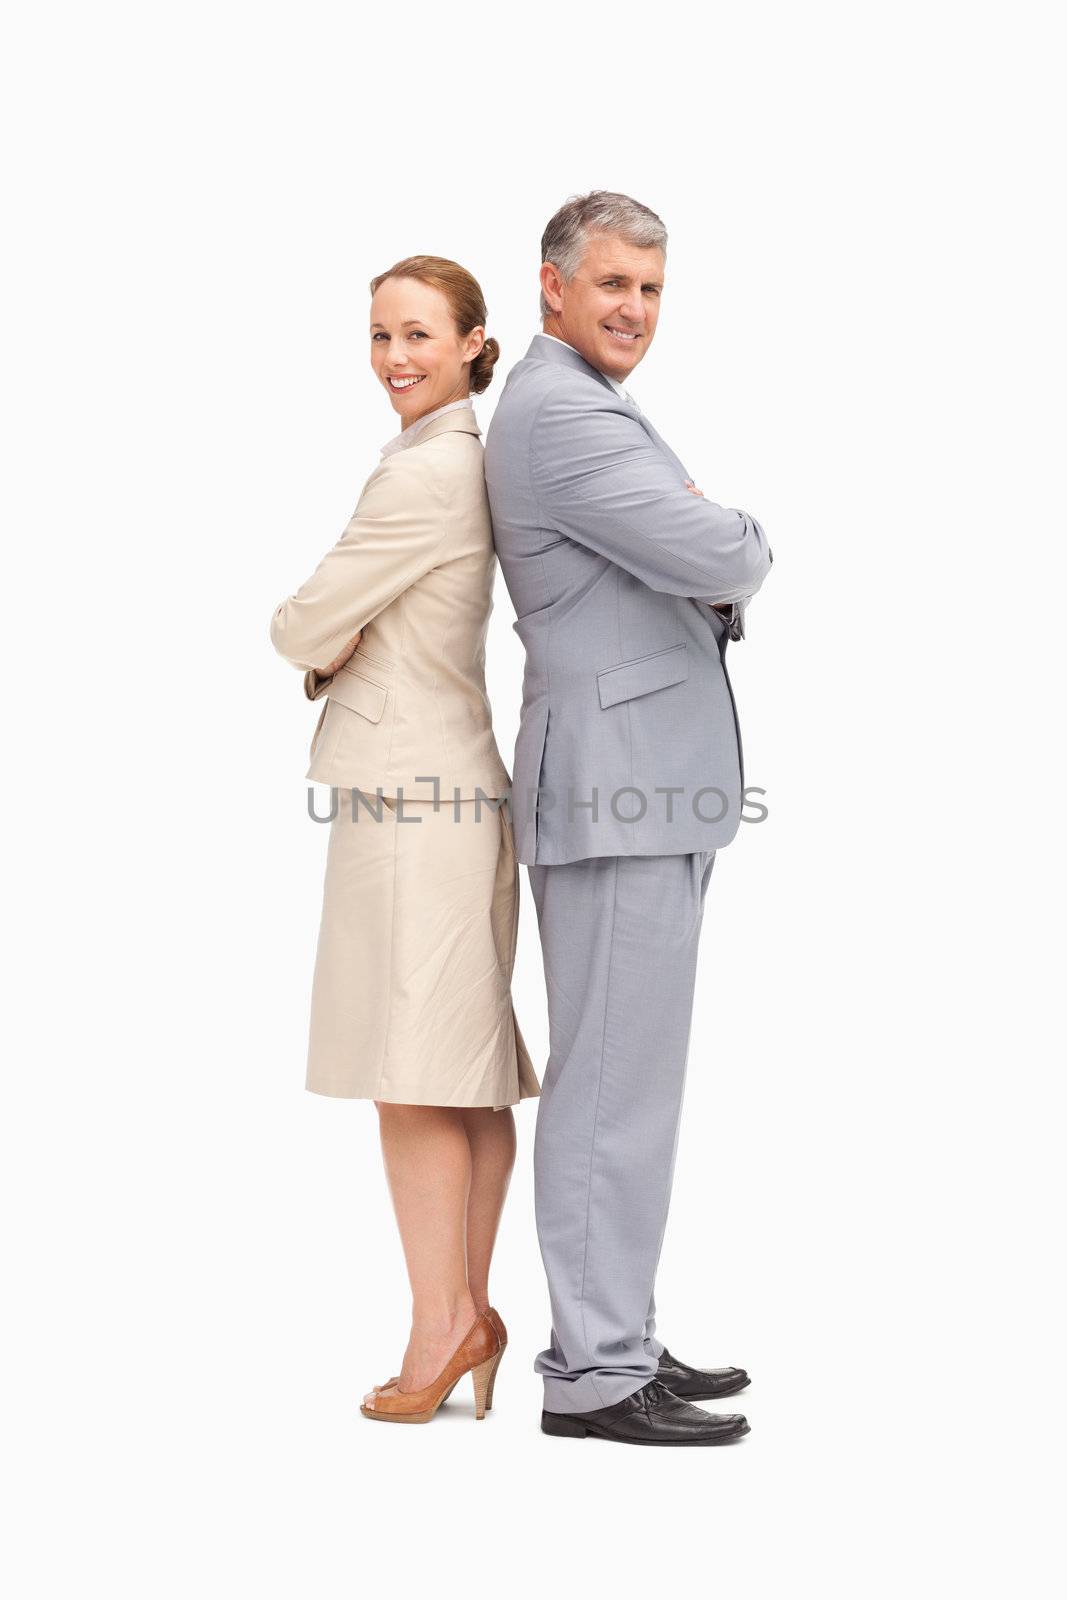 Portrait of smiling business people back to back by Wavebreakmedia